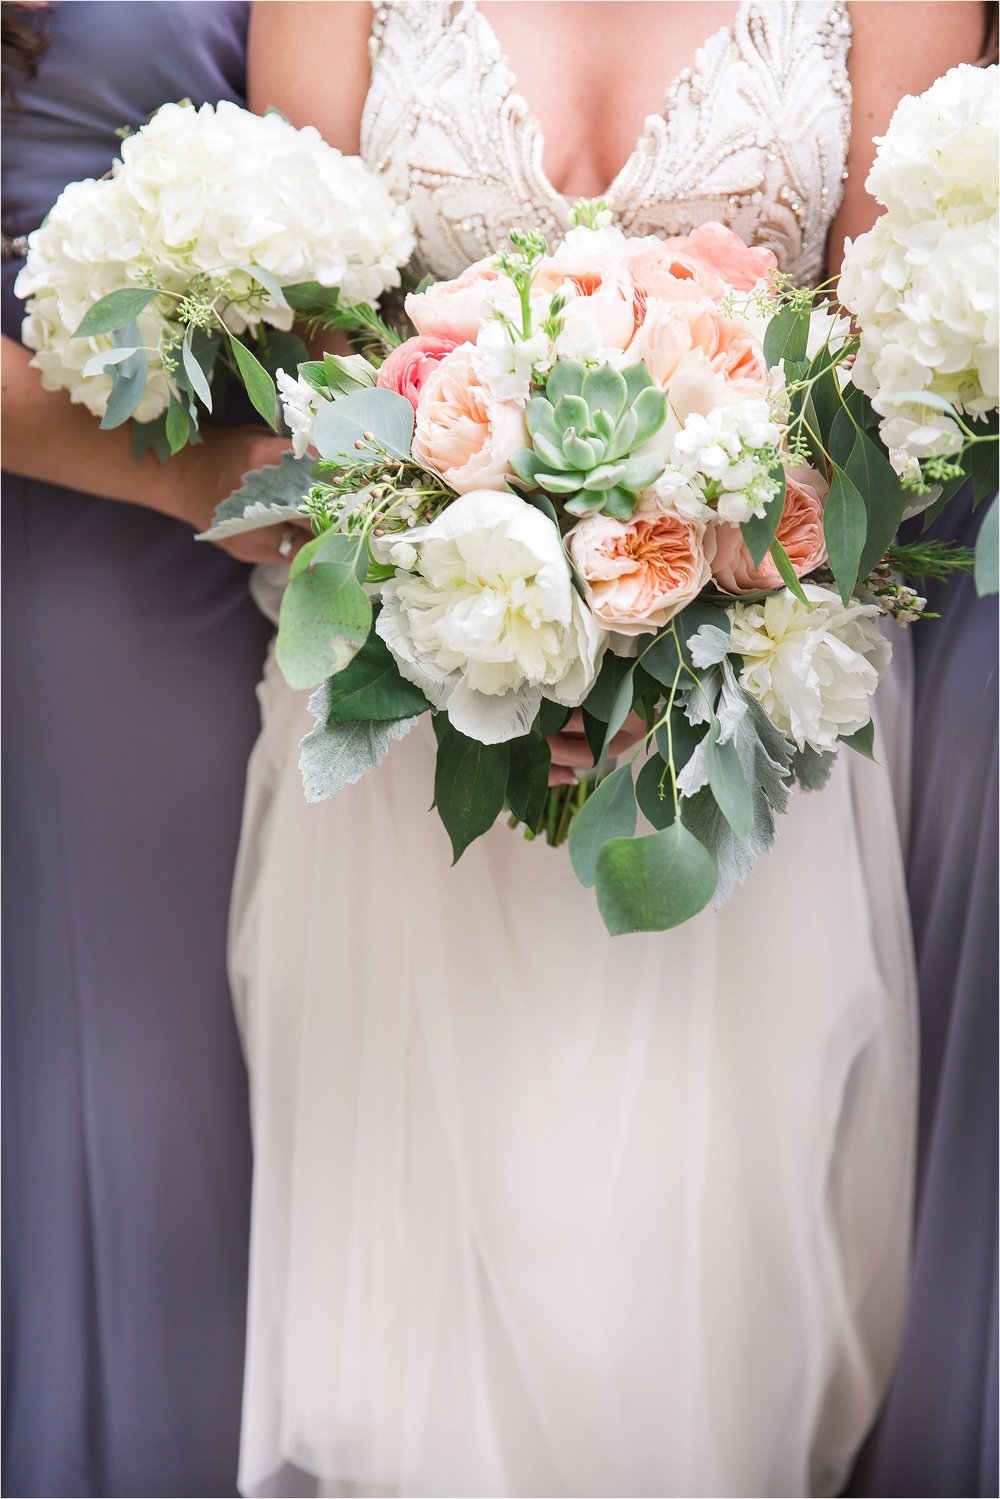 Bridesmaids in grey with white bouquets at Wyndham Grand Resort at Bonnet Creek Wedding 